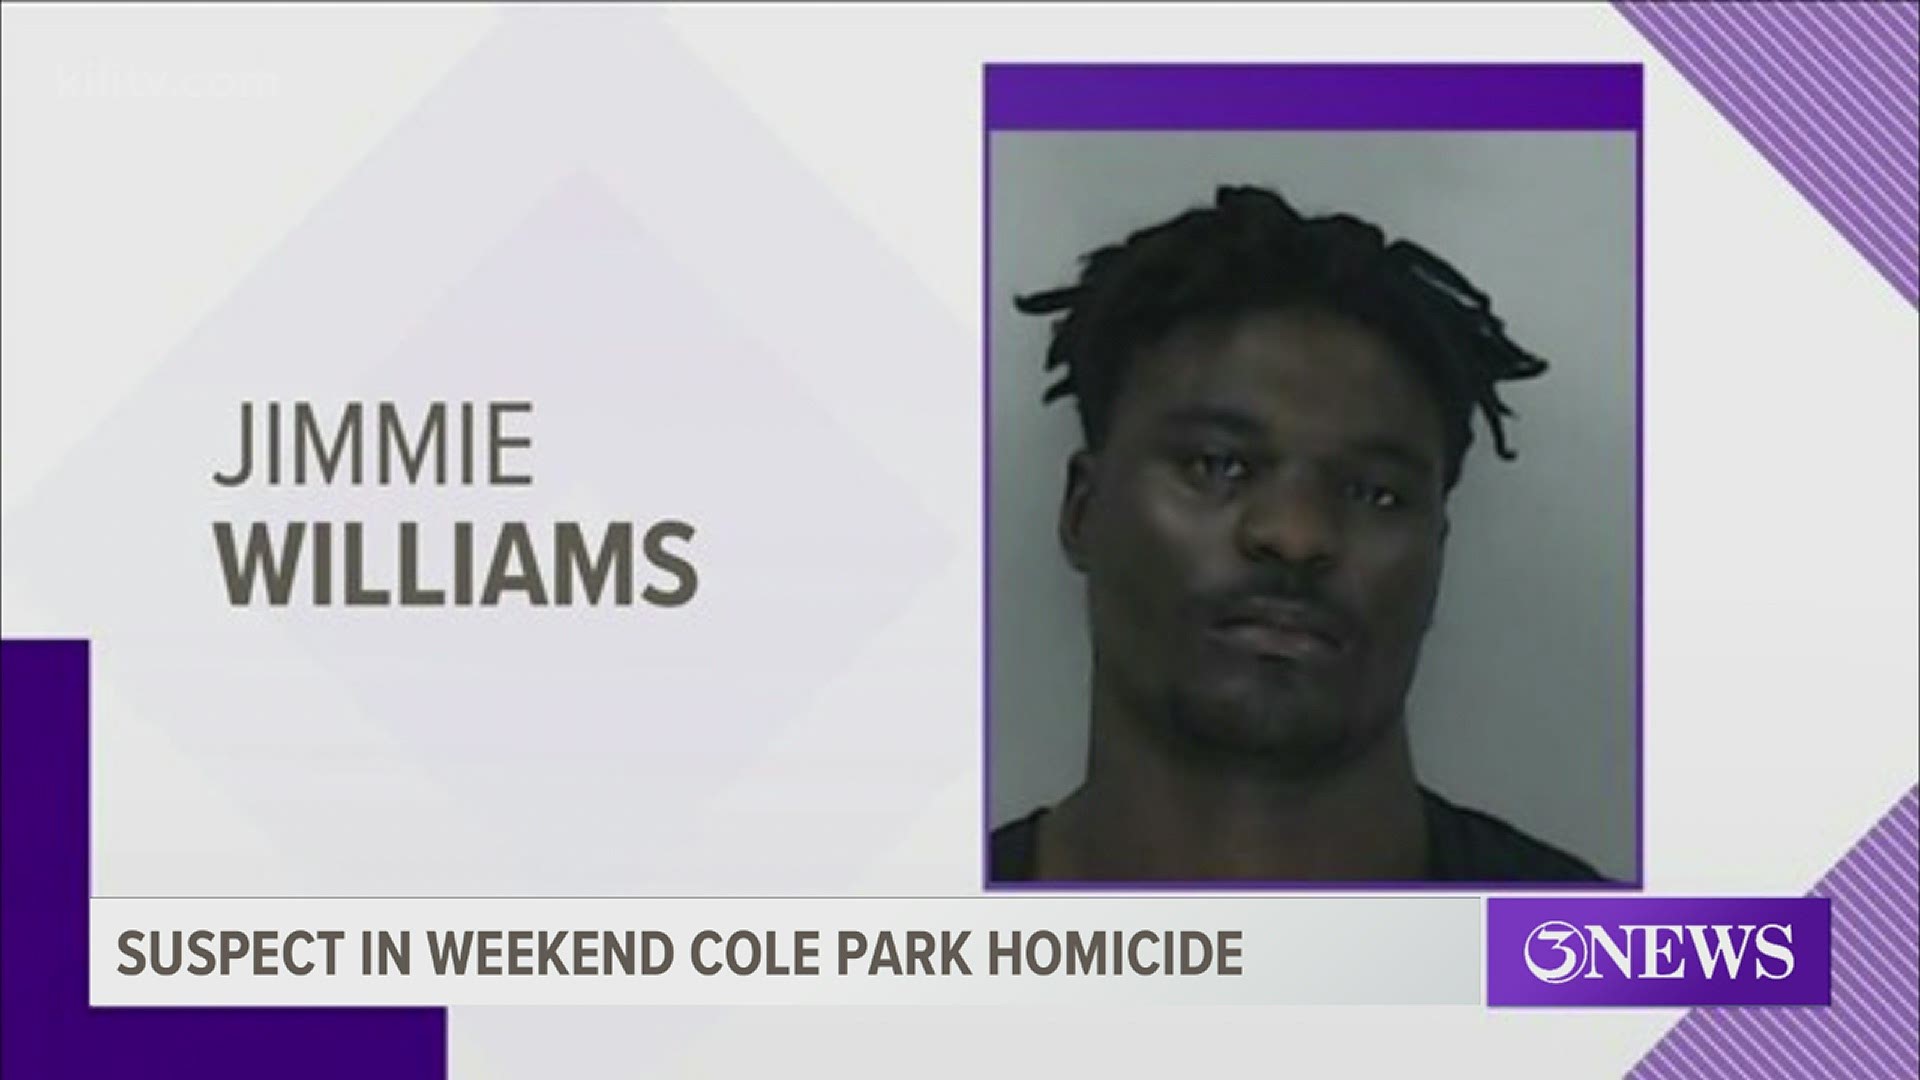 Corpus Christi police have made an arrest in a weekend homicide in which three people were shot, one of them fatally, at the Cole Park Amphitheatre.